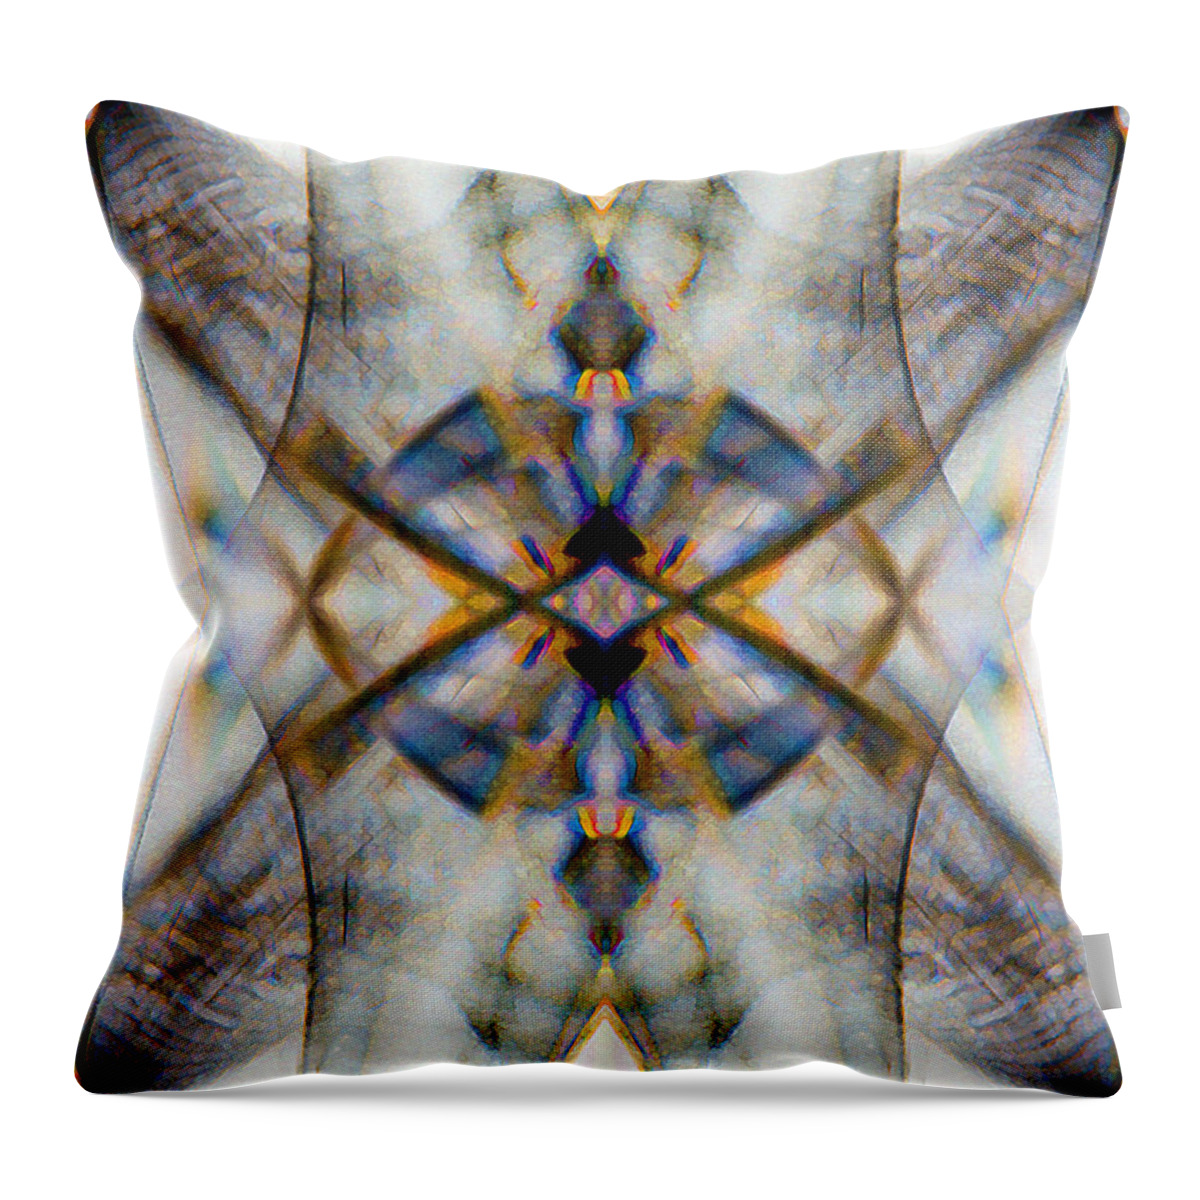 Digital Throw Pillow featuring the digital art Blanket_0016 by Alex W McDonell